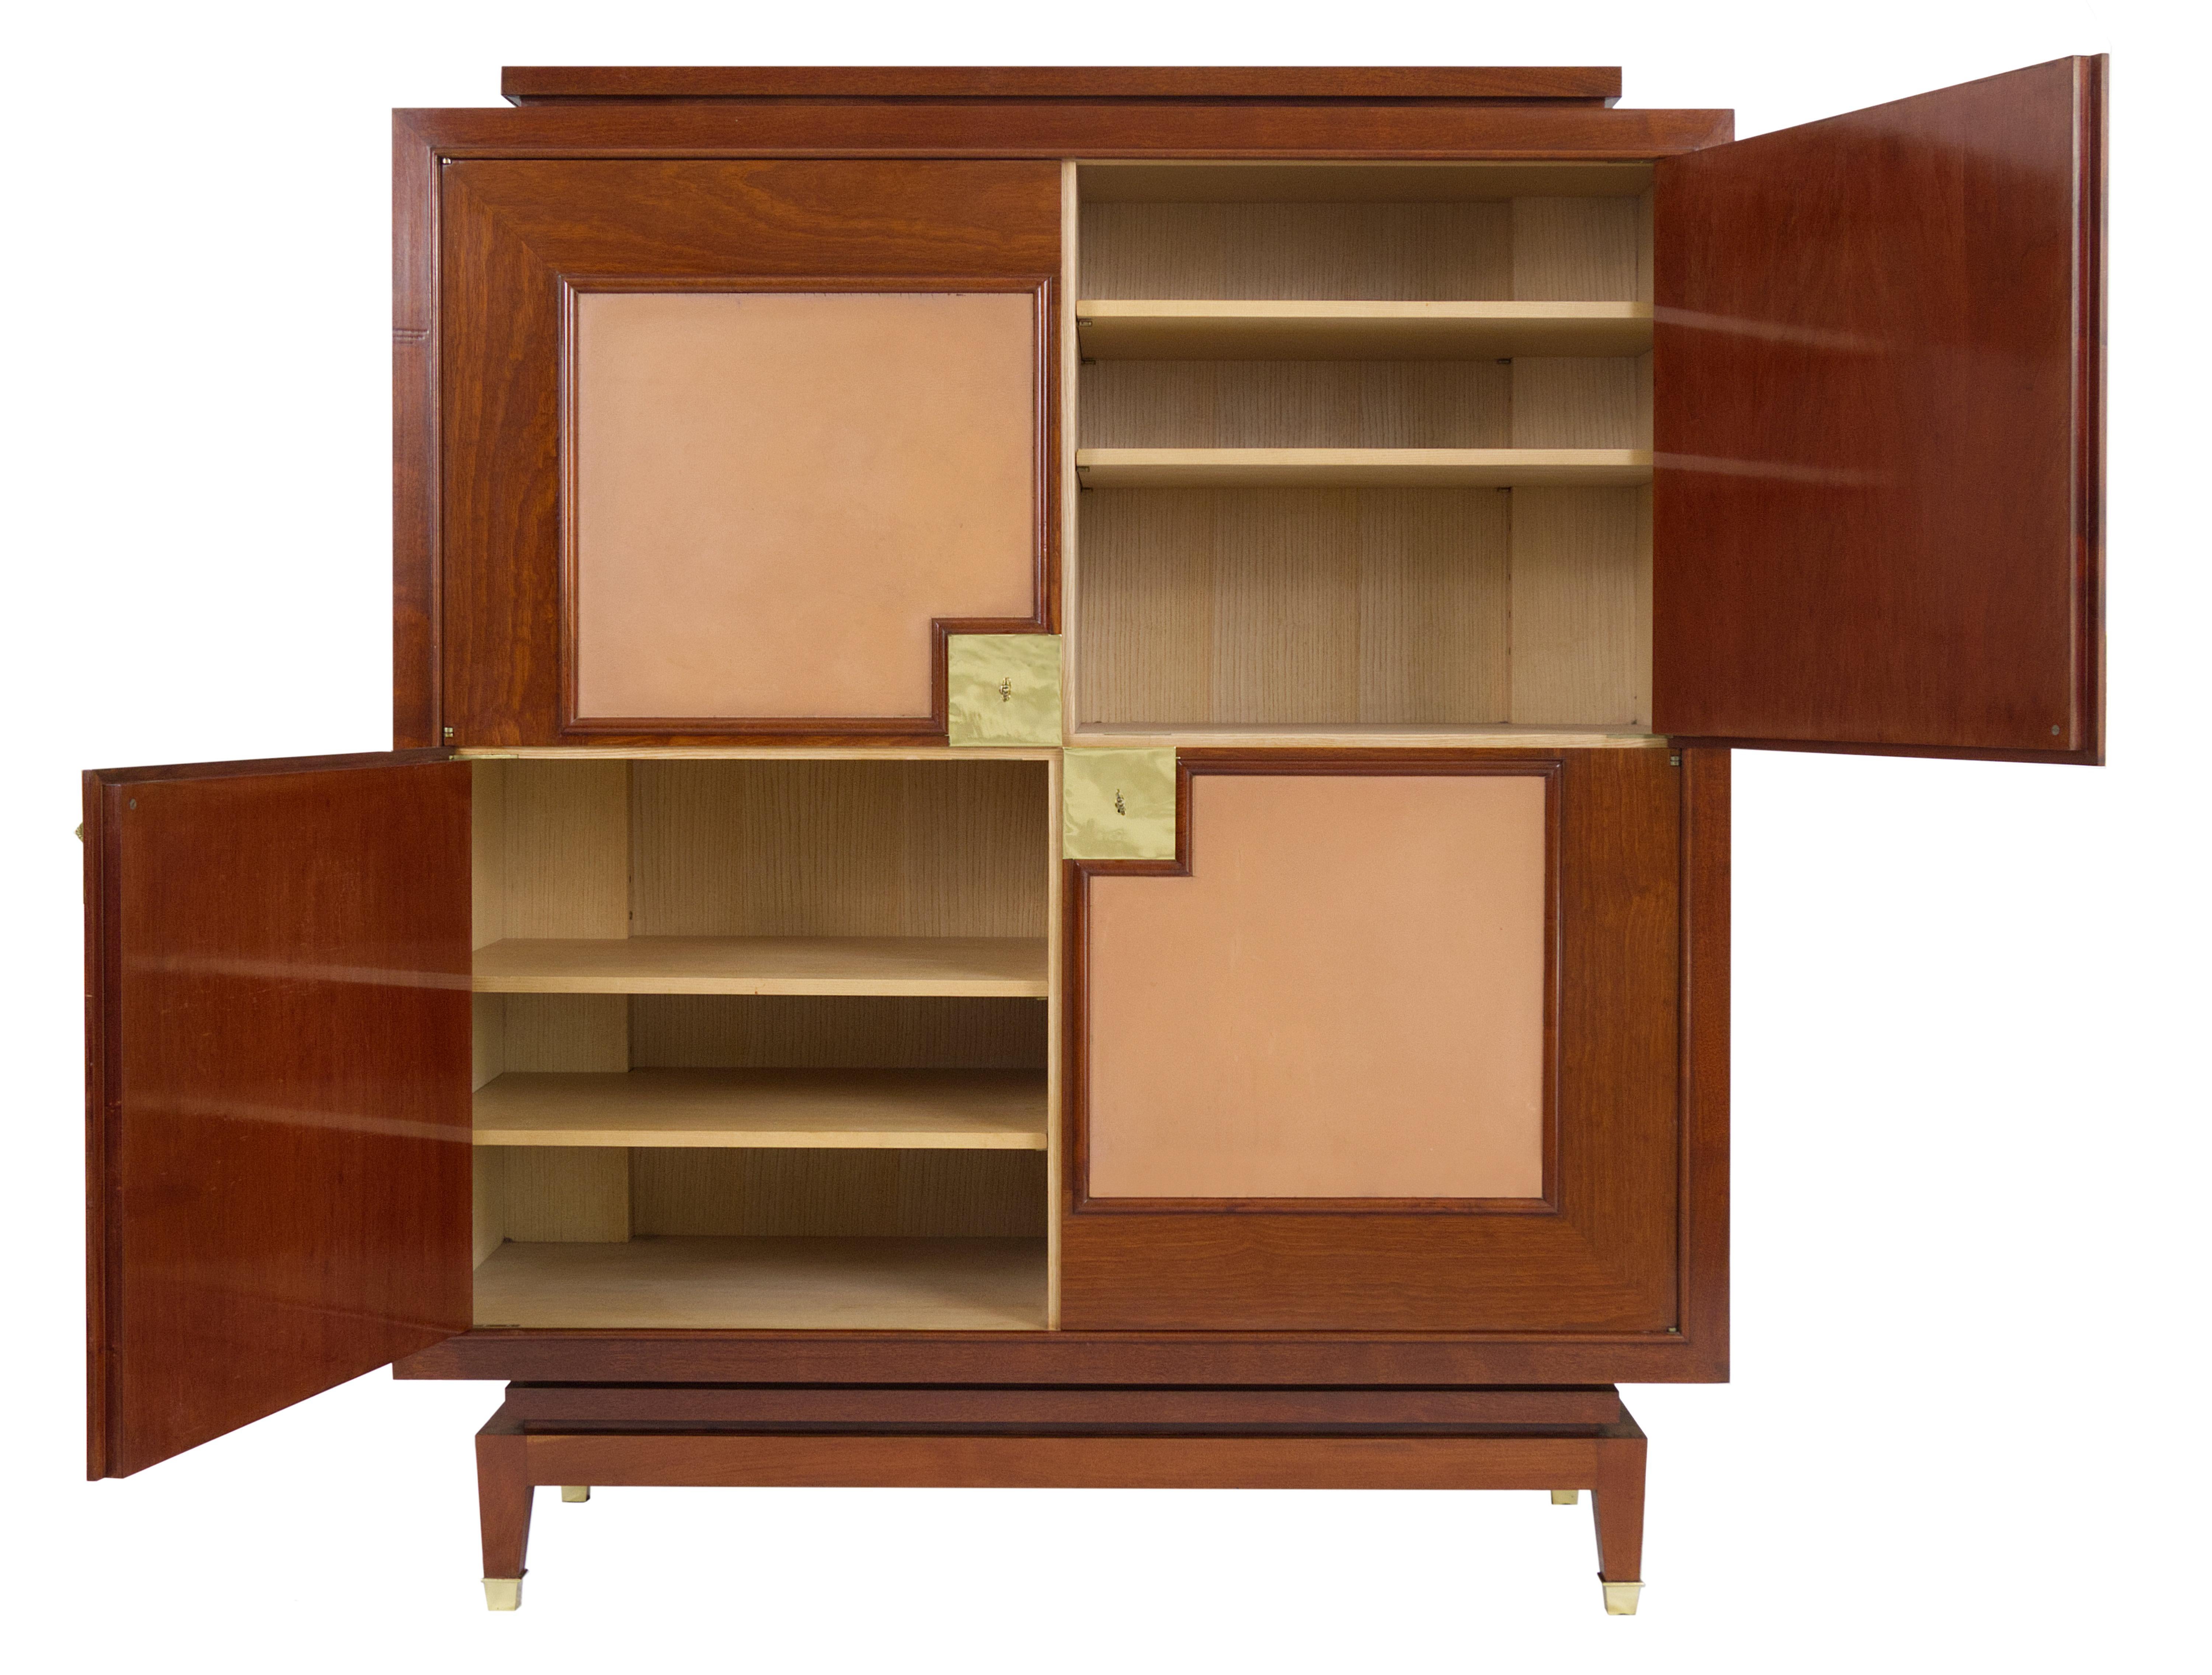 Perfectly proportioned small French Art Deco living room cabinet/ bar cabinet made of mahogany and leather veneer with the best craftsmanship and probably designed by Rousseau et Lardin around 1940. The strictly geometrically designed cabinet has a